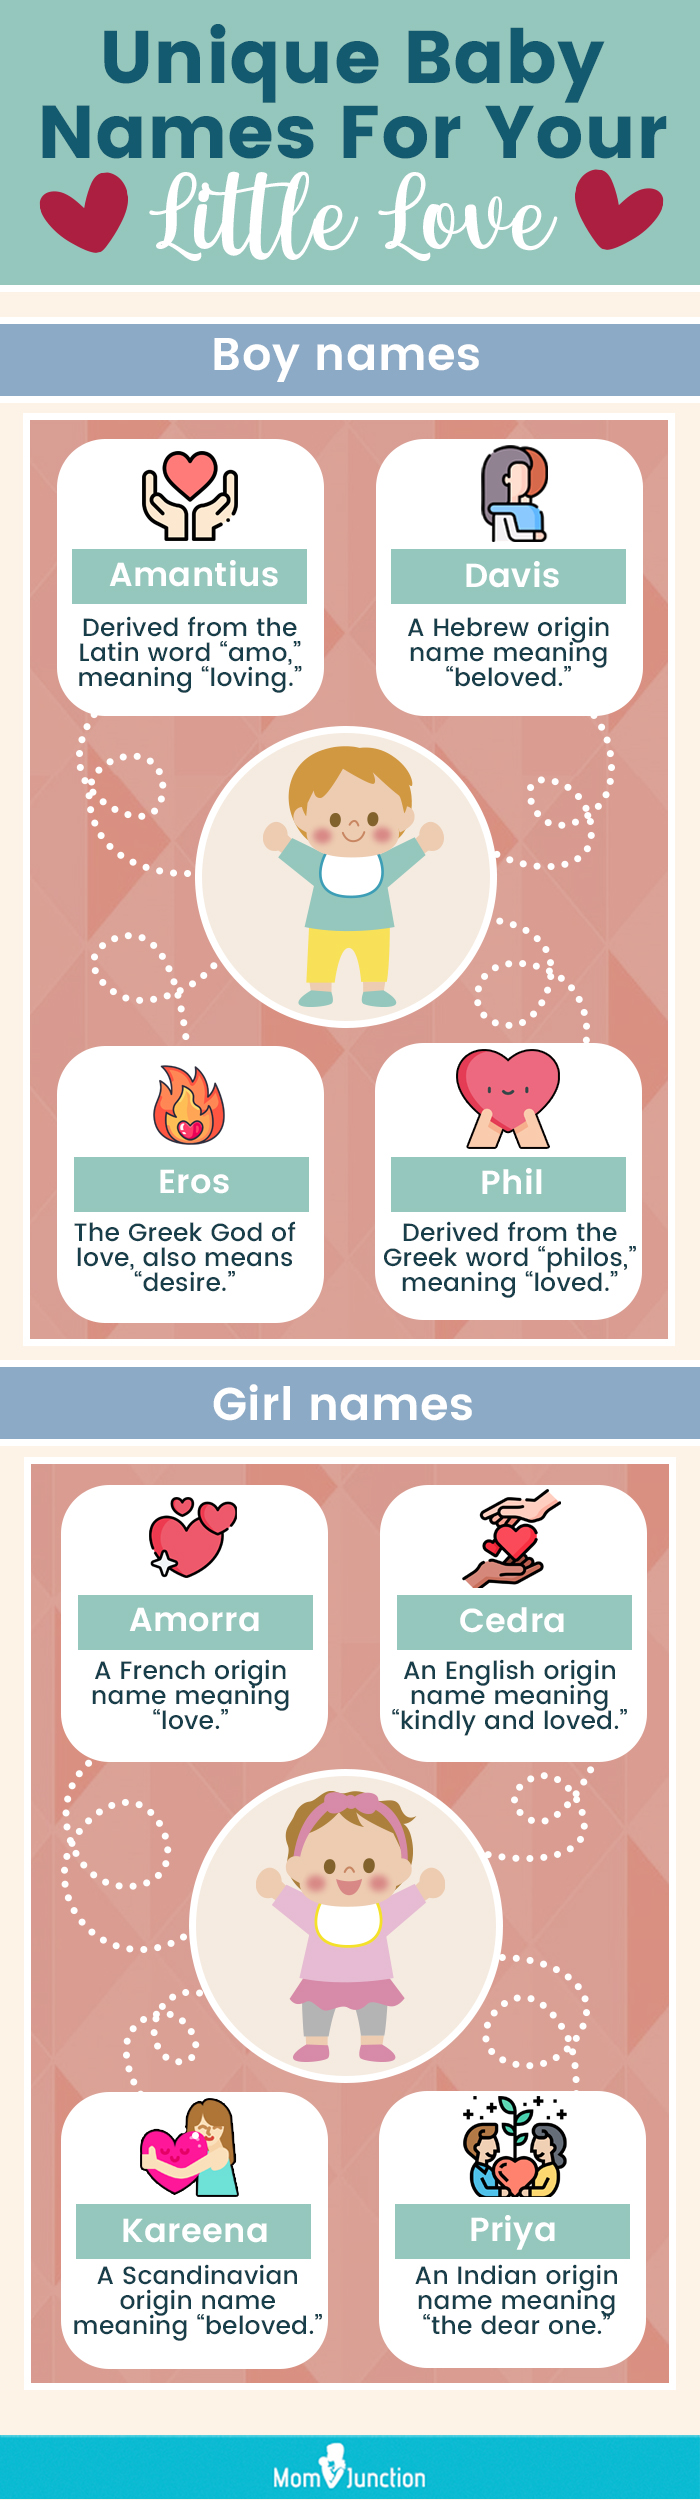 unique baby names for your little love (infographic)